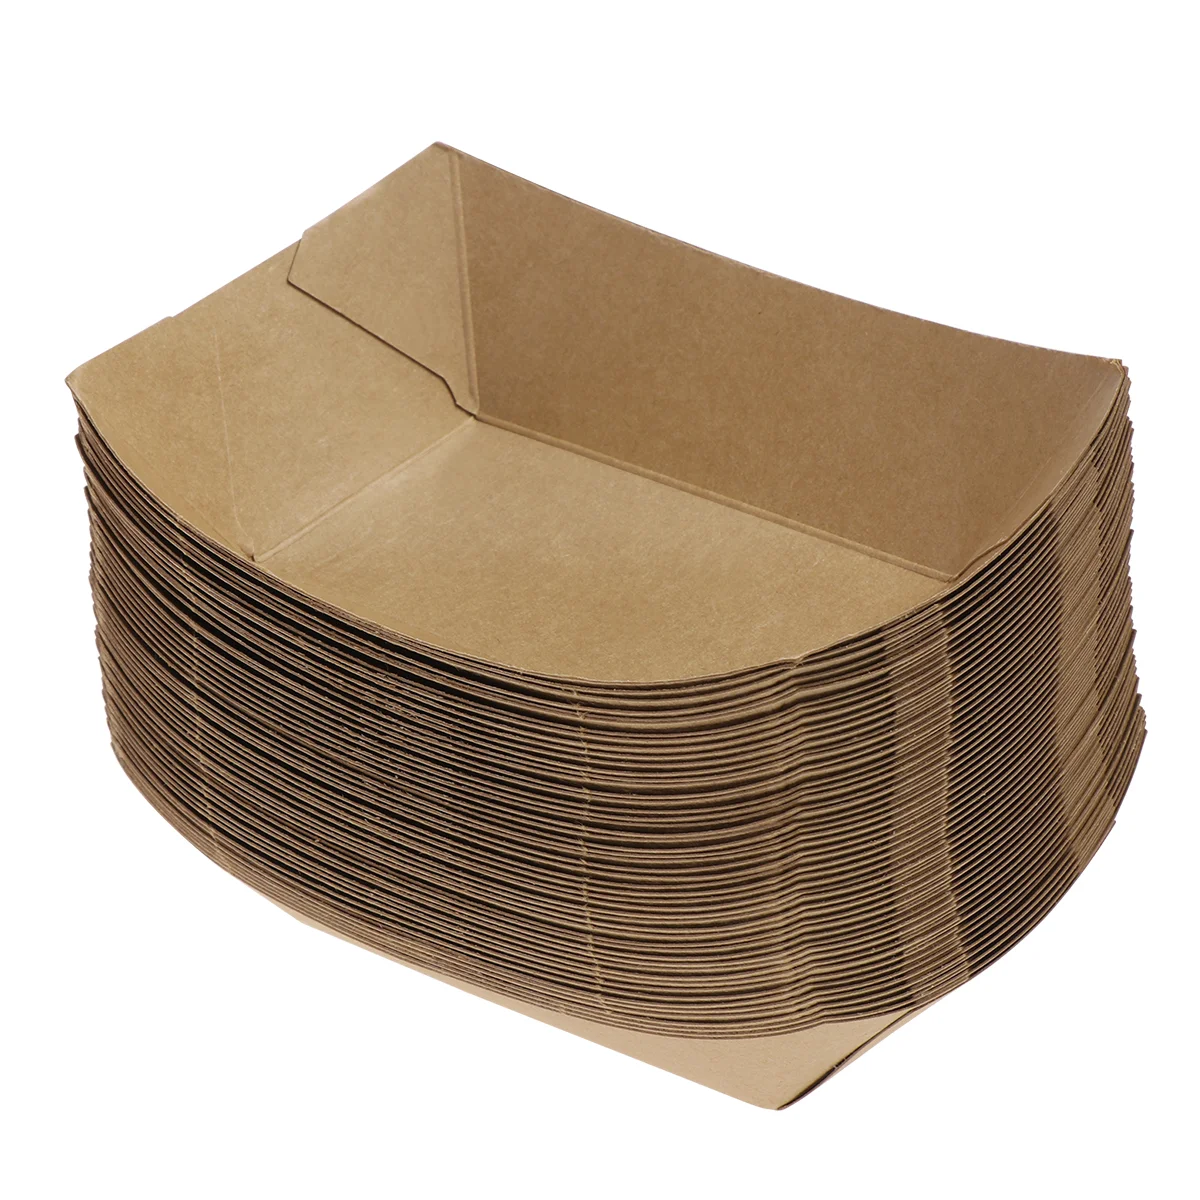 

Brown Paper Food Trays Chinese Take Out Boxes Compost Container Take Out Containers Lunchbox Container Carton Paperboard Basket